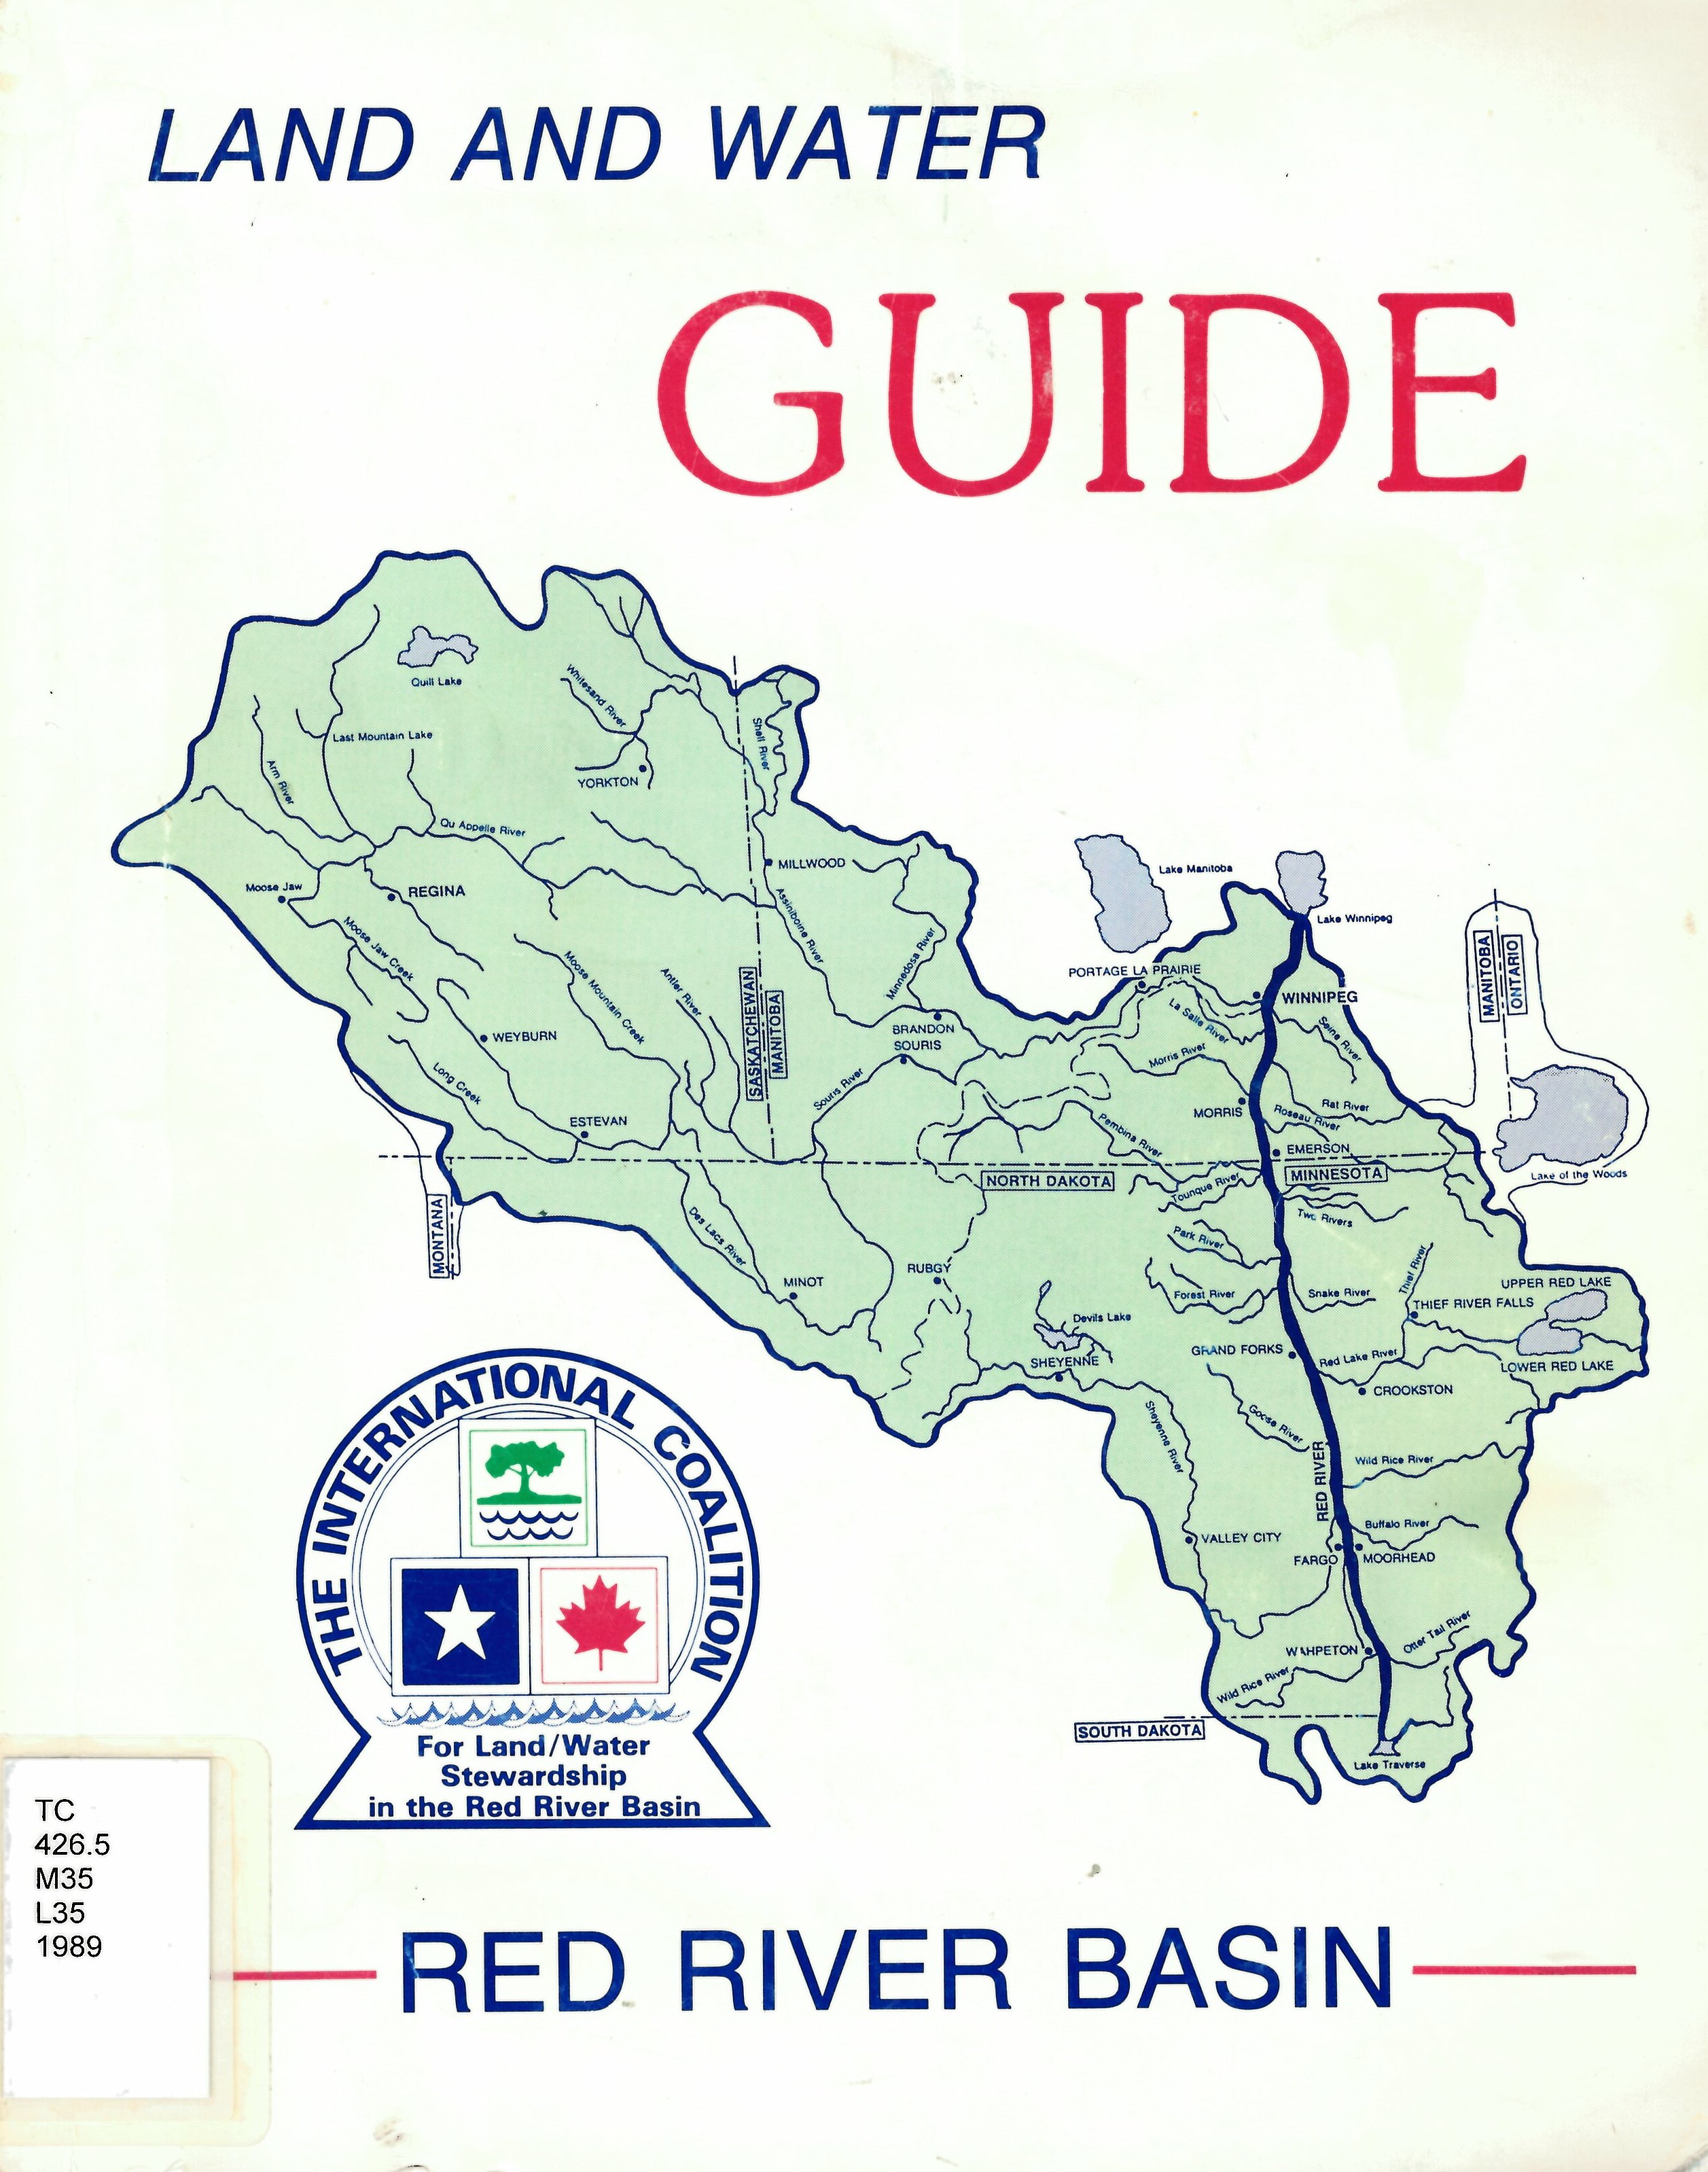 Land and water guide, Red River Basin